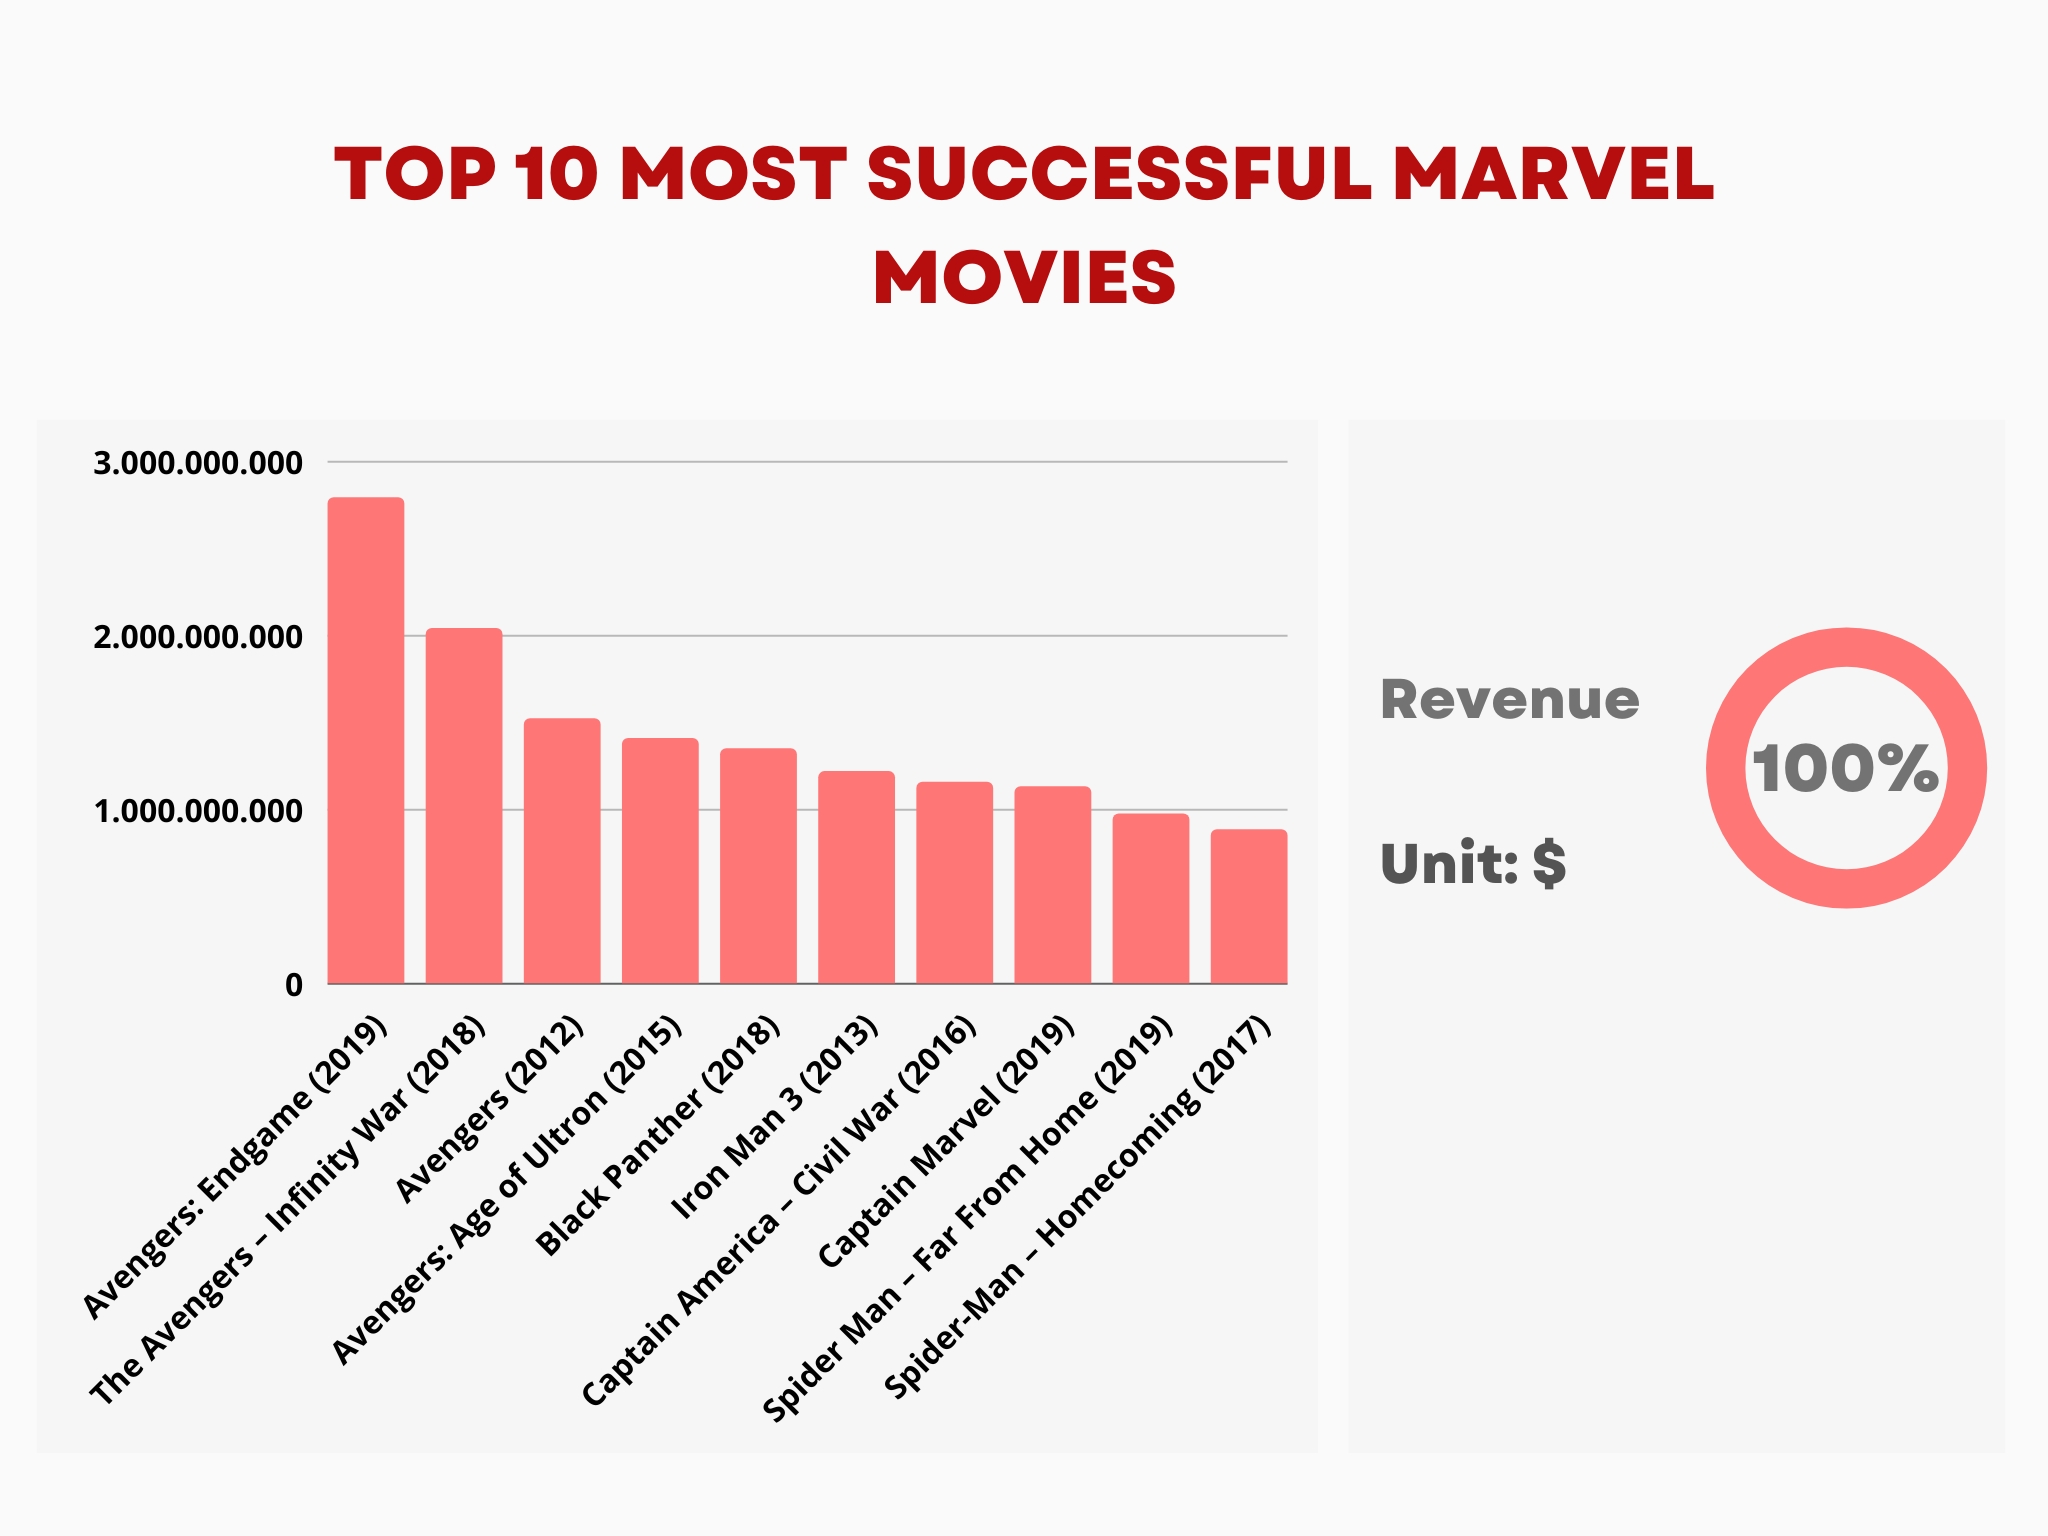 Top 10 Most Successful Marvel Movies